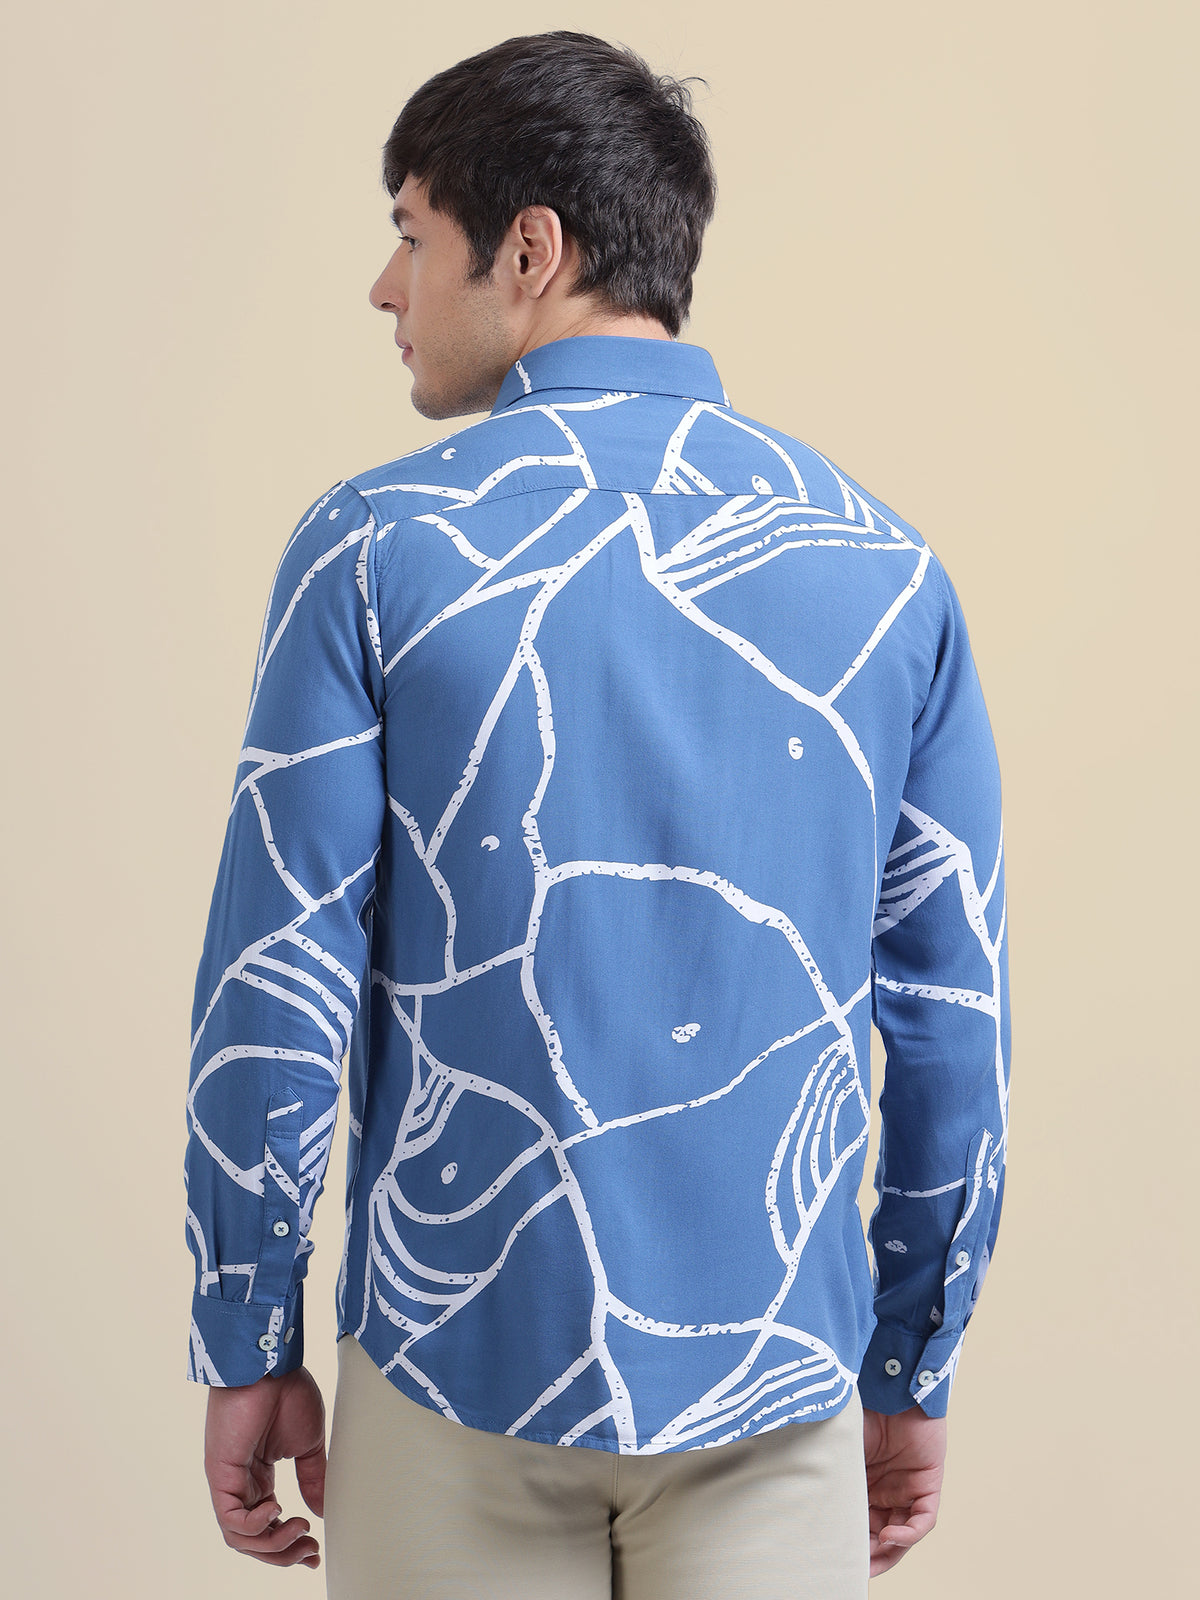 AMSWAN ABSTRACT PRINTED PREMIUM SHIRT FOR MEN'S IN RAYON FABRIC